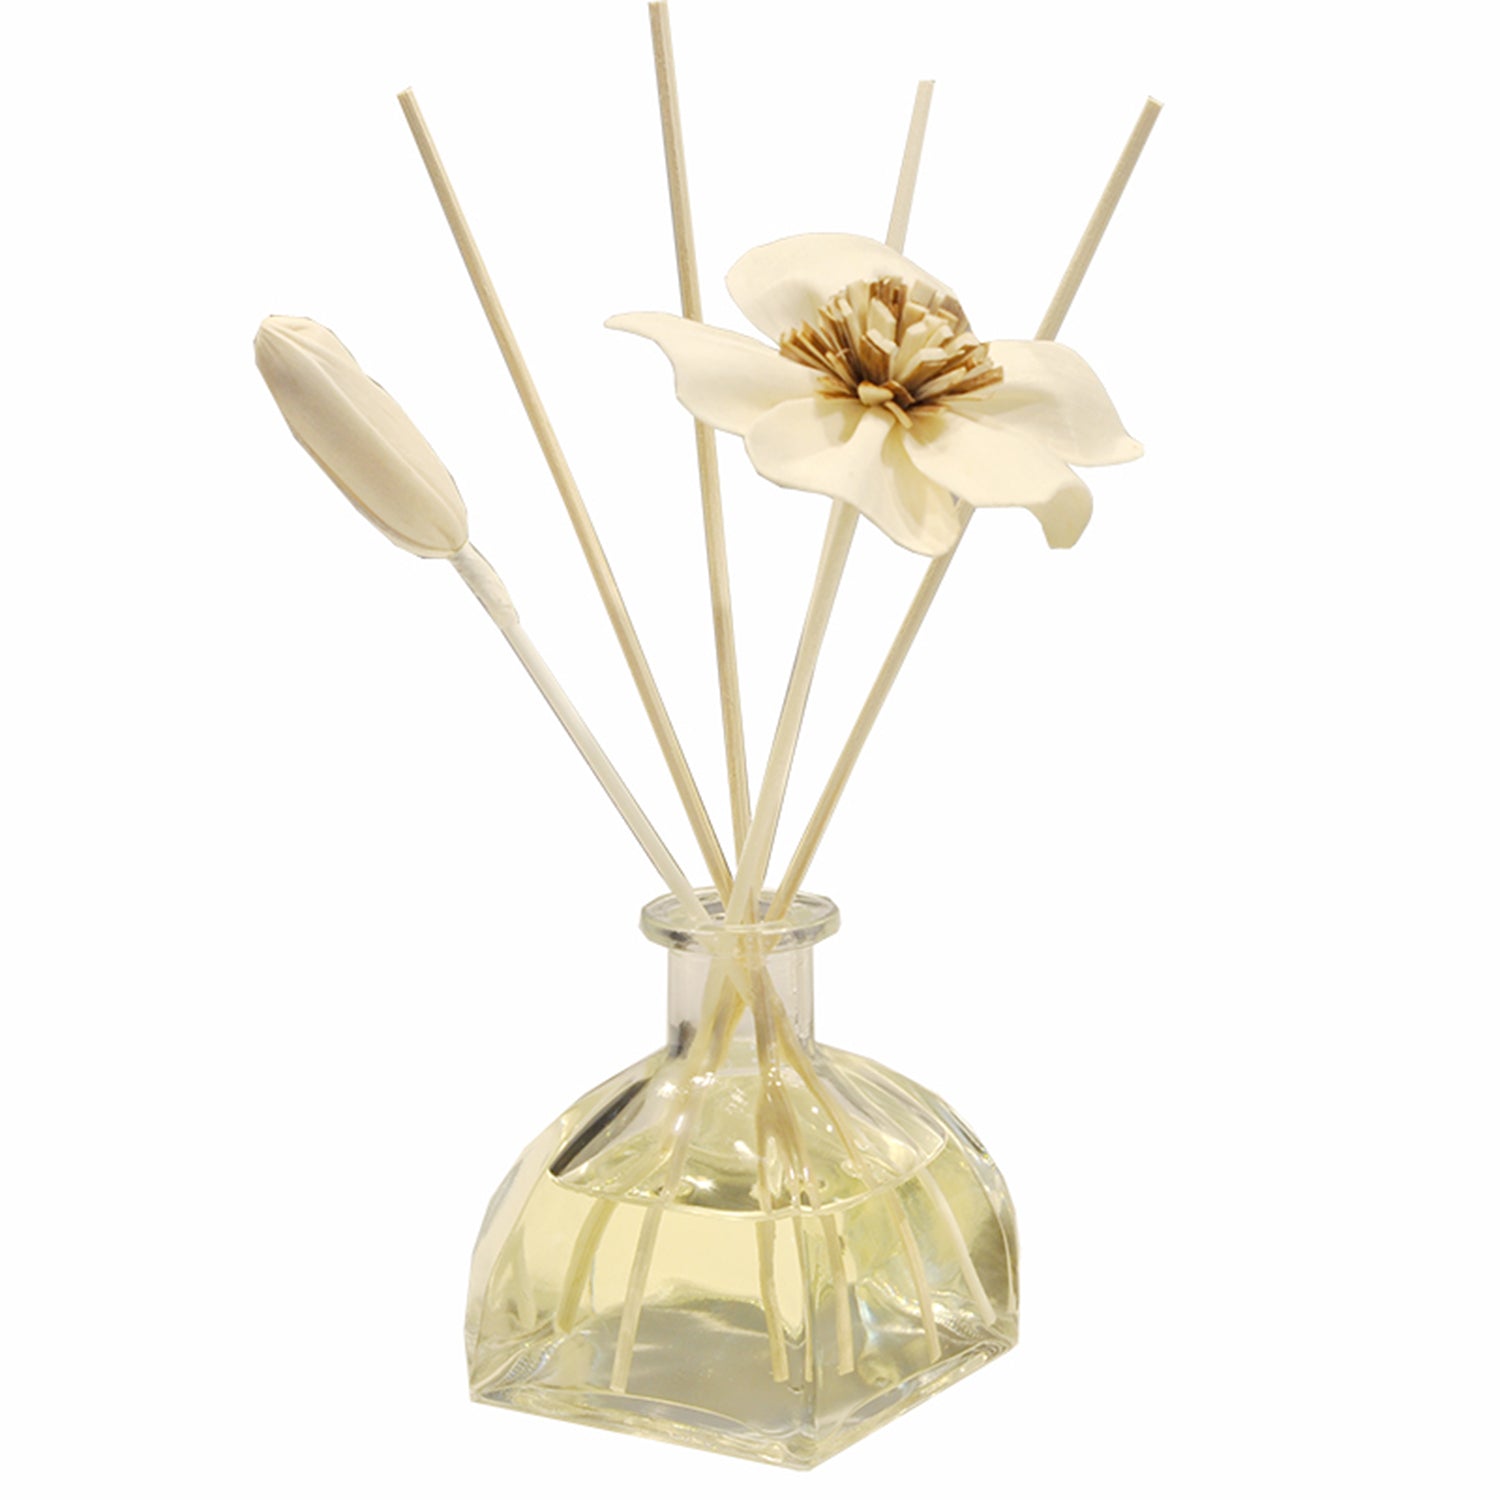 Breathwell Reed Diffuser 150ML Premium Essential Oil Aromatherapy Mongolia Yurt Bottle with Reed Stick and Sola Flower Reed Diffuser Breathwell Black Opium 